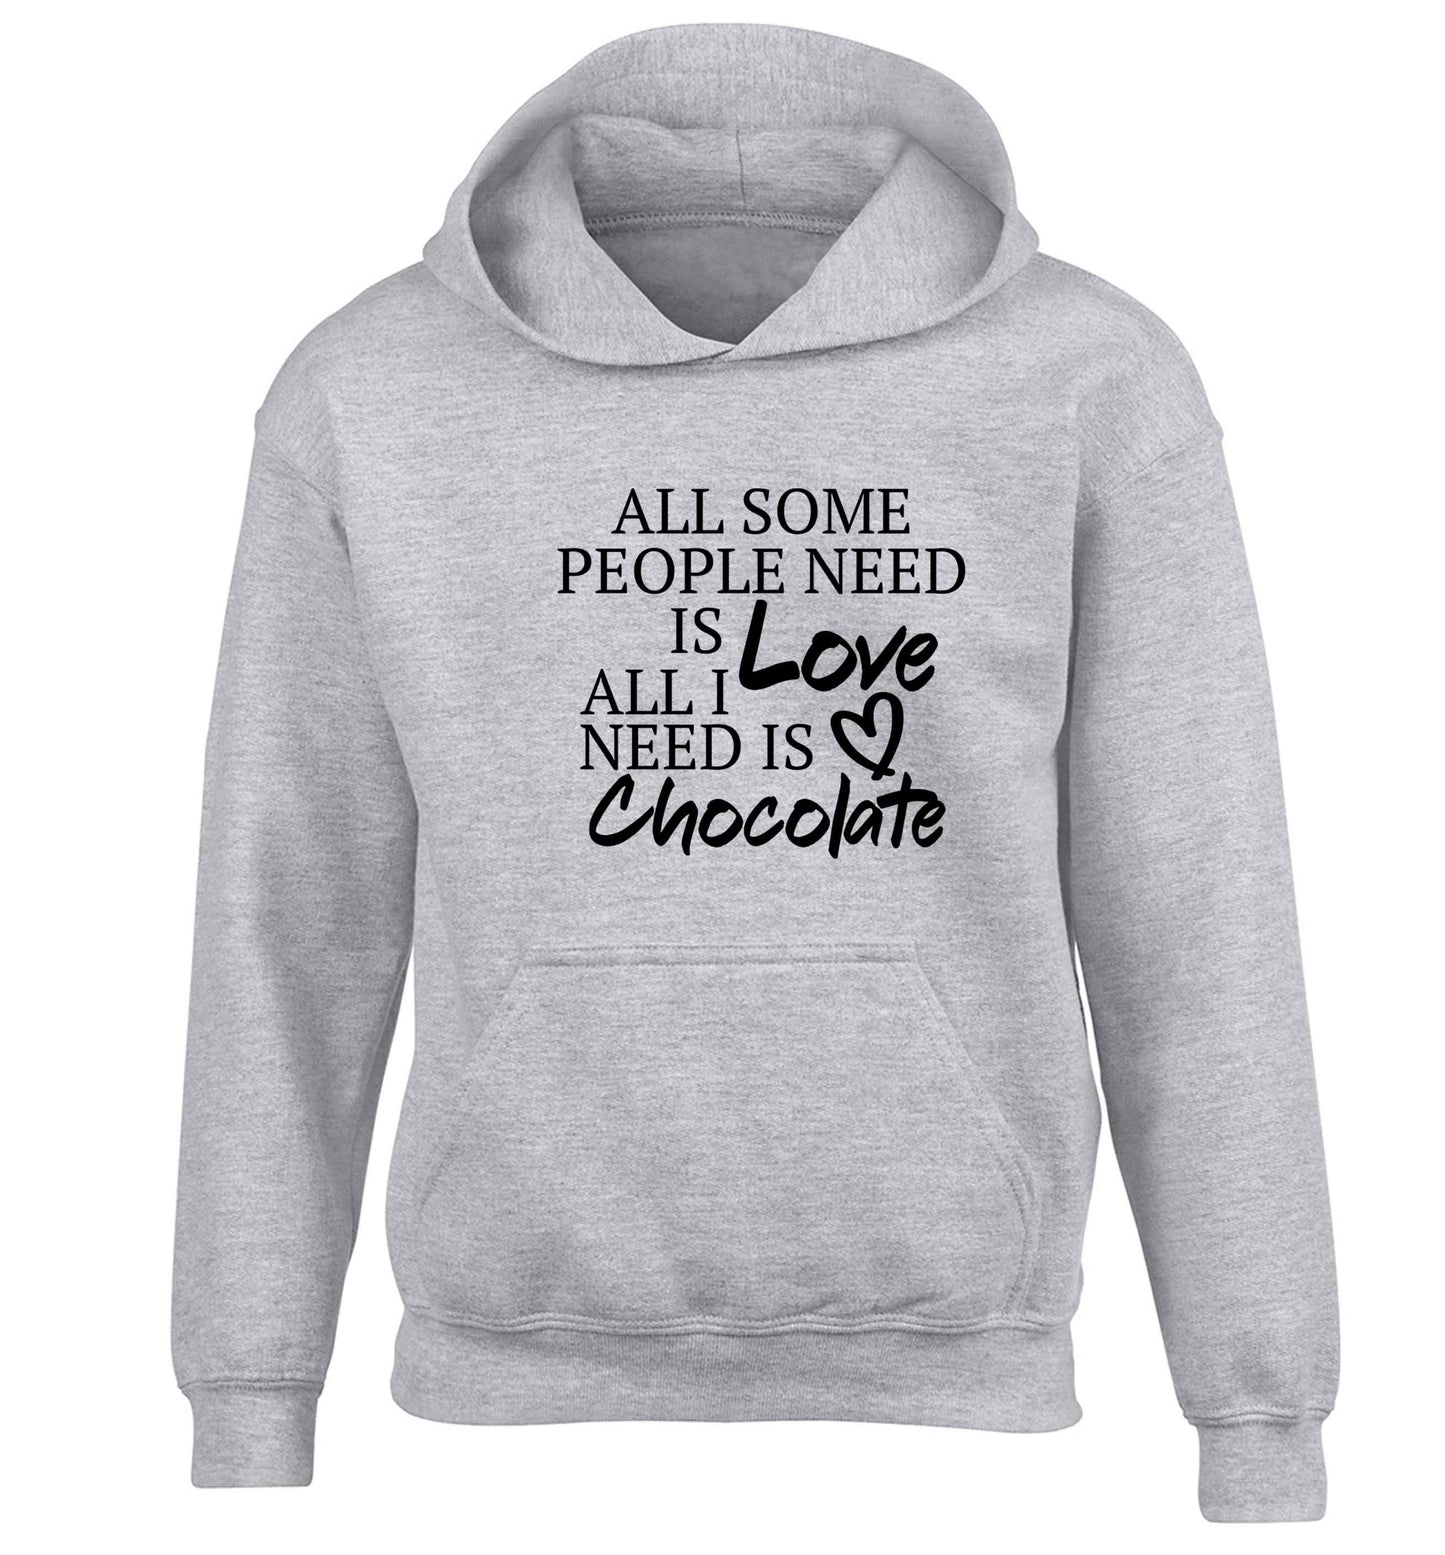 All some people need is love all I need is chocolate children's grey hoodie 12-13 Years